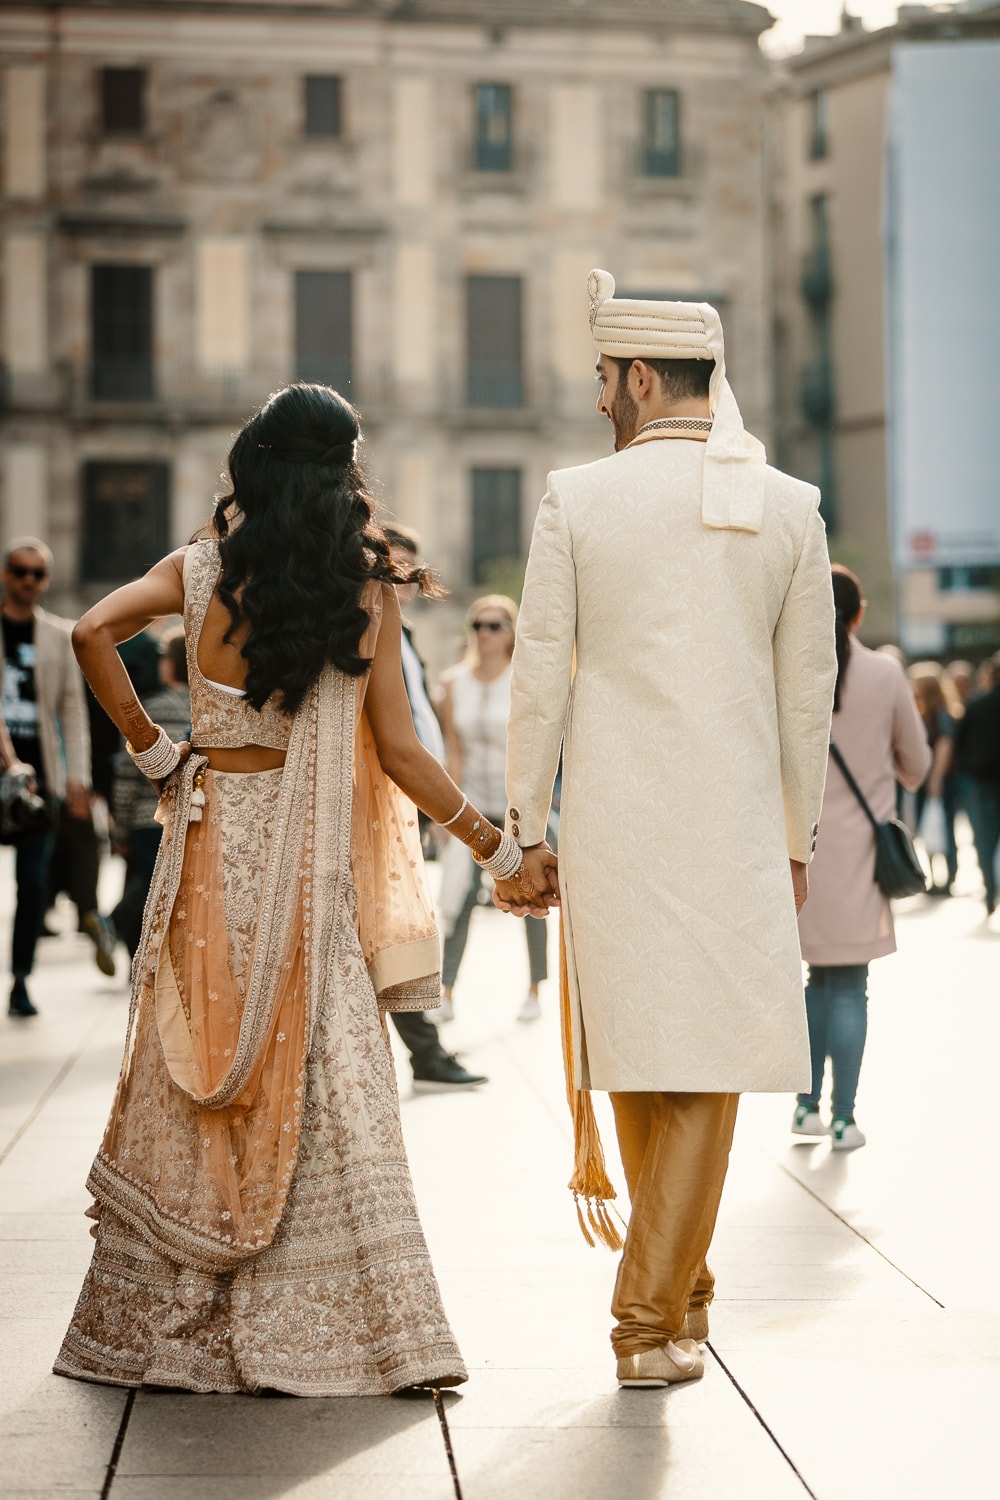 Mehndi In Palau Requesens Barcelona | Planning by Barcelona Brides | Photography by And I Love You So